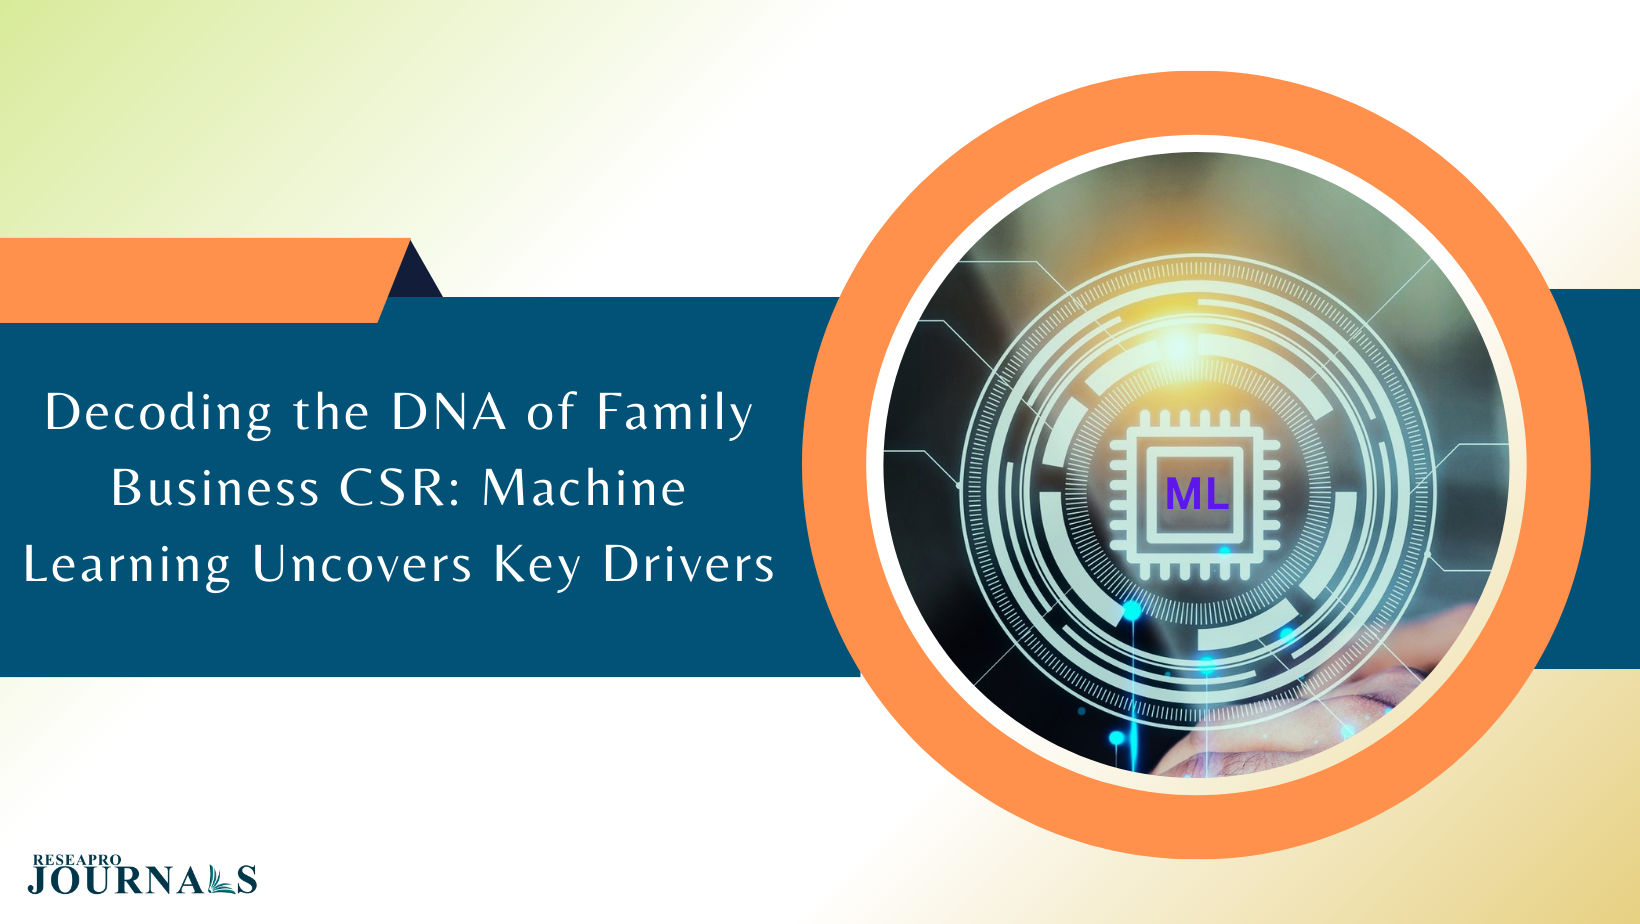 Decoding the DNA of Family Business CSR: Machine Learning Uncovers Key Drivers